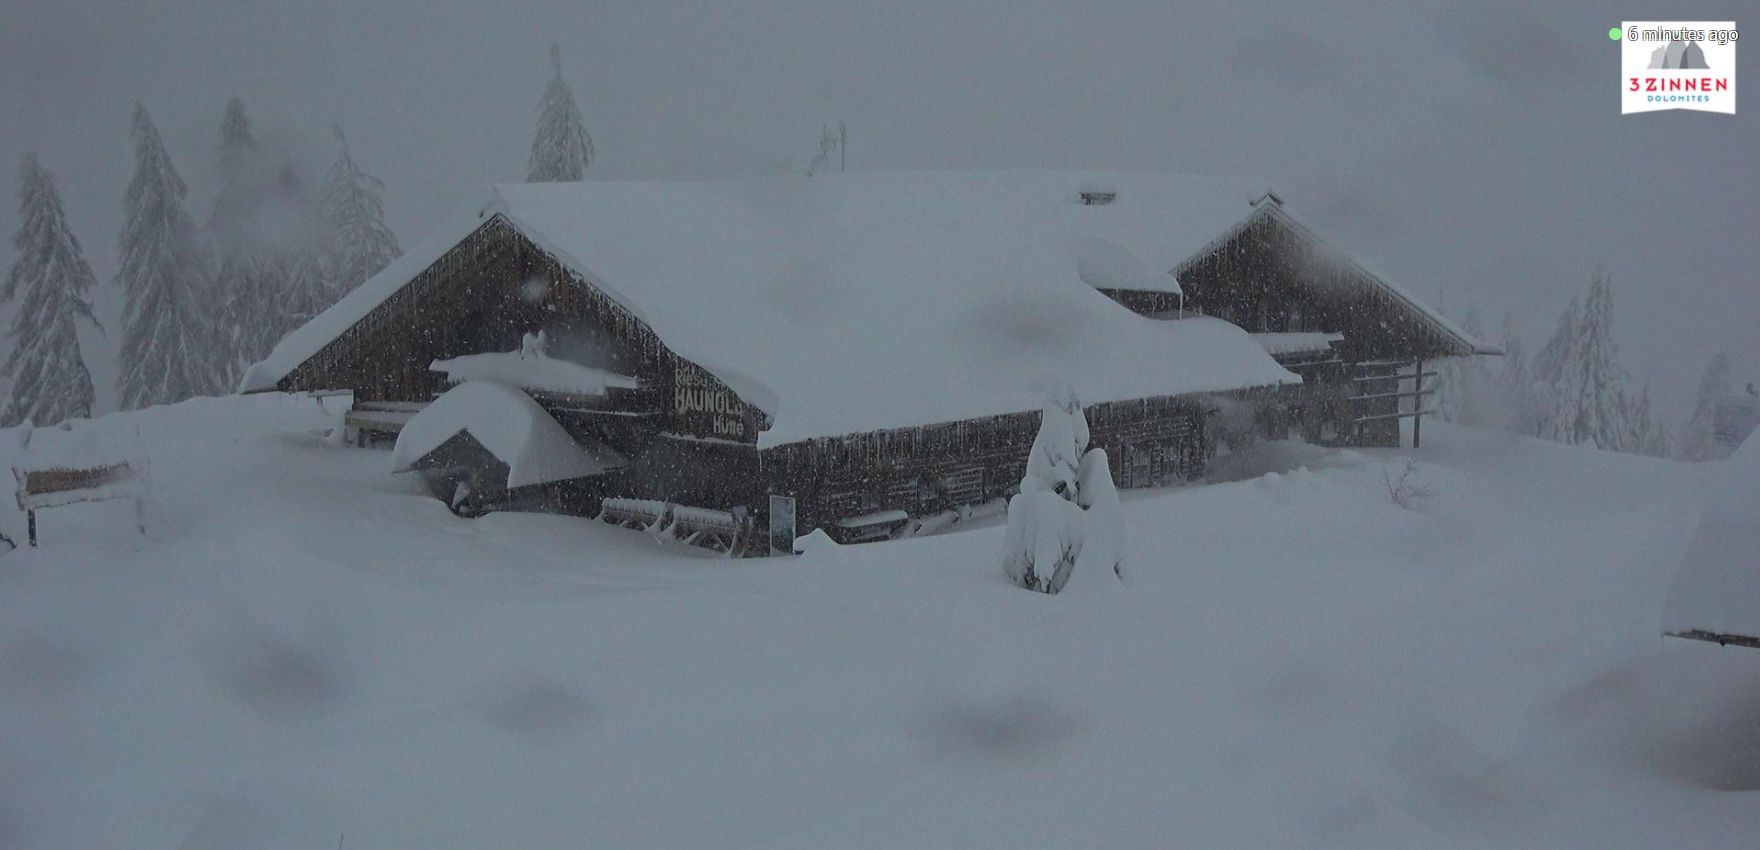 Even today heavy snowfall in the eastern Southern Alps, like here in Innichen